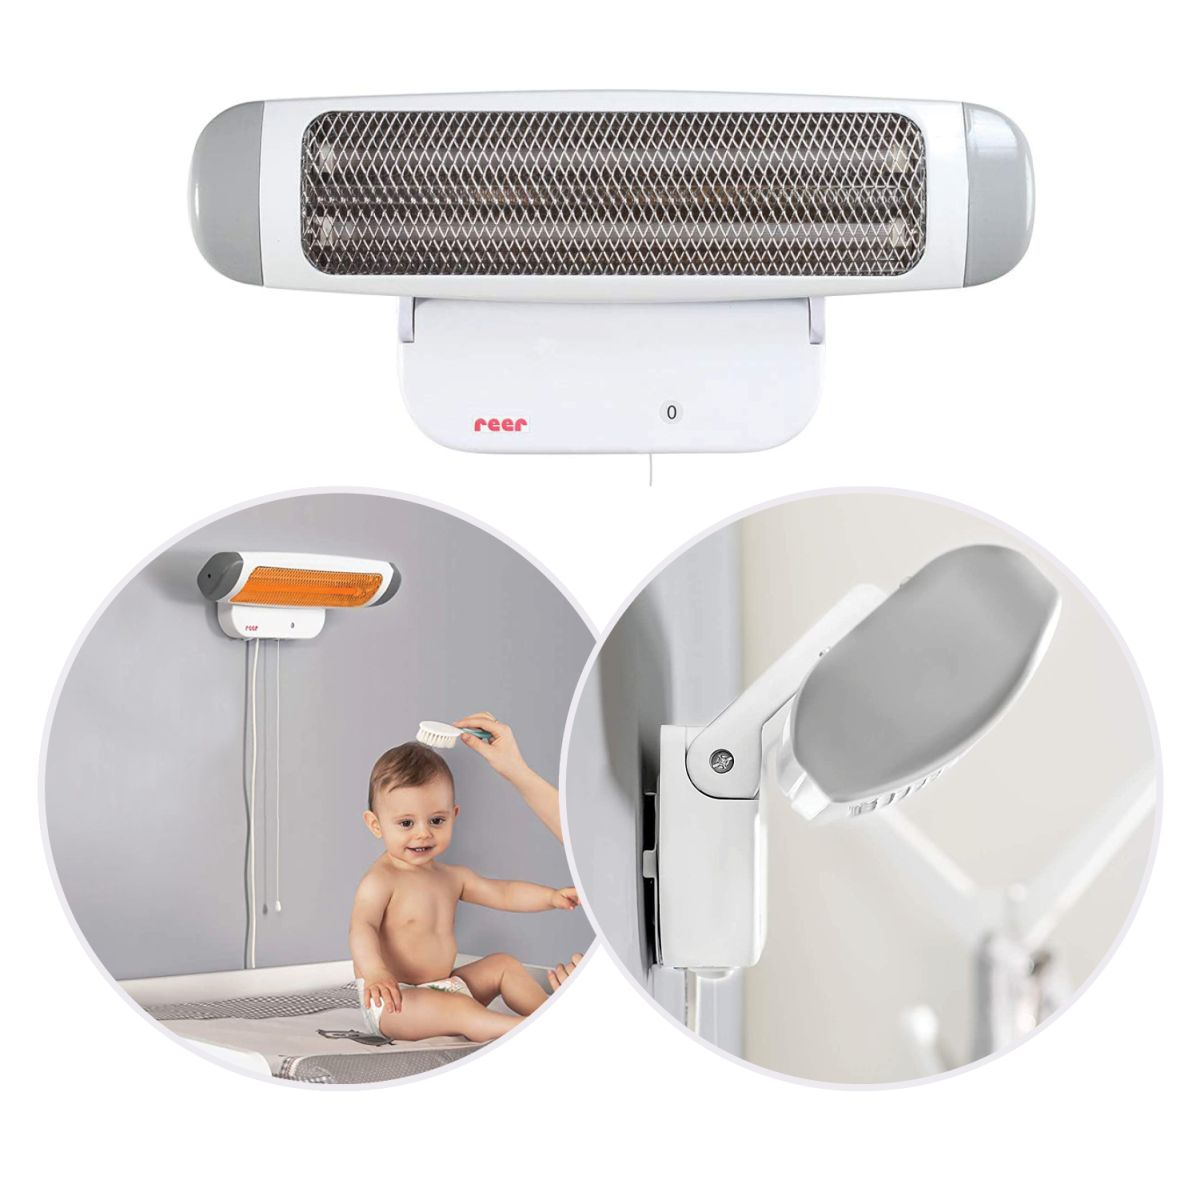 FeelWell changing table heater